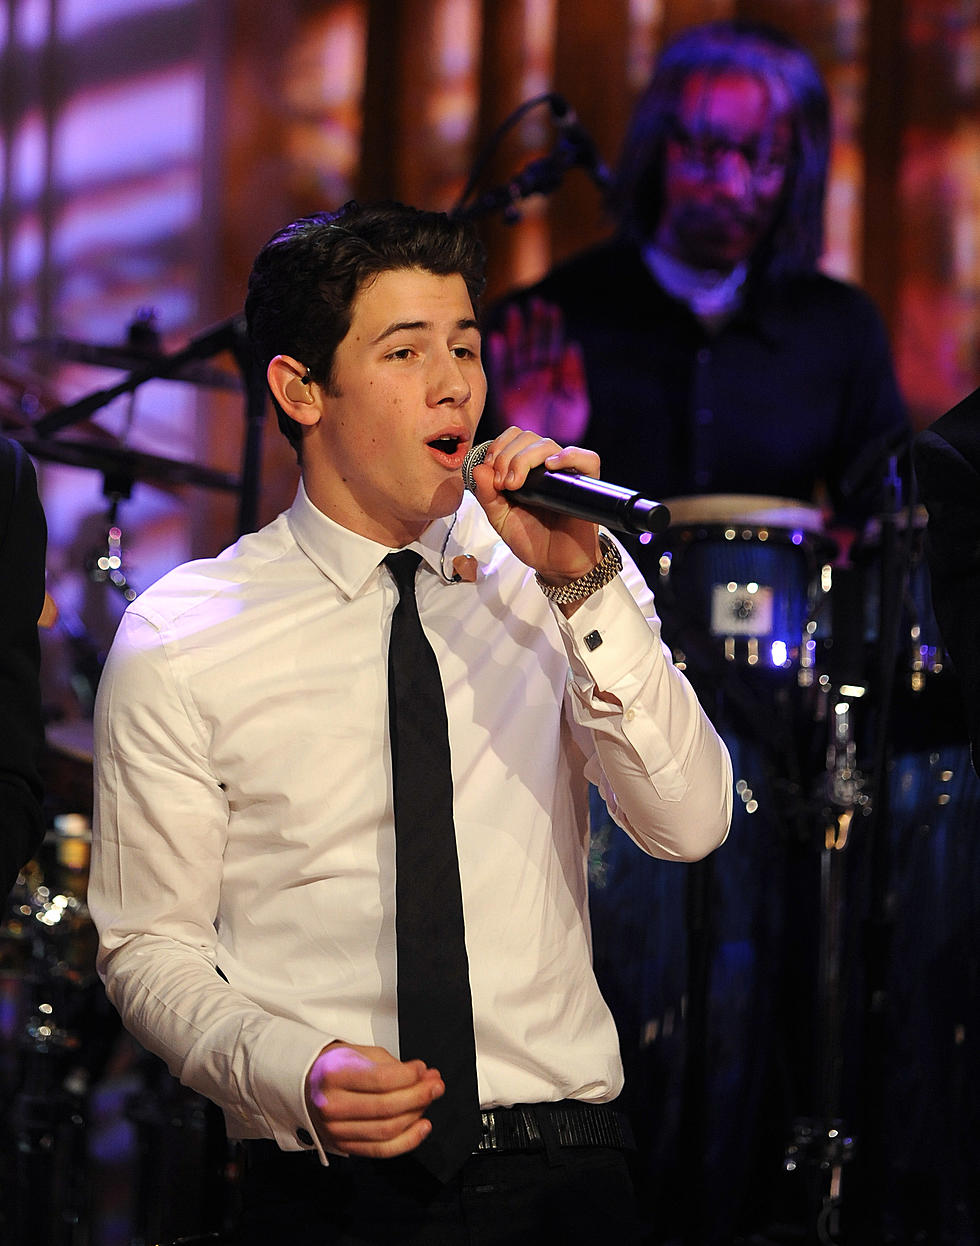 Nick Jonas Performing at Mohawk Valley Community College This Weekend